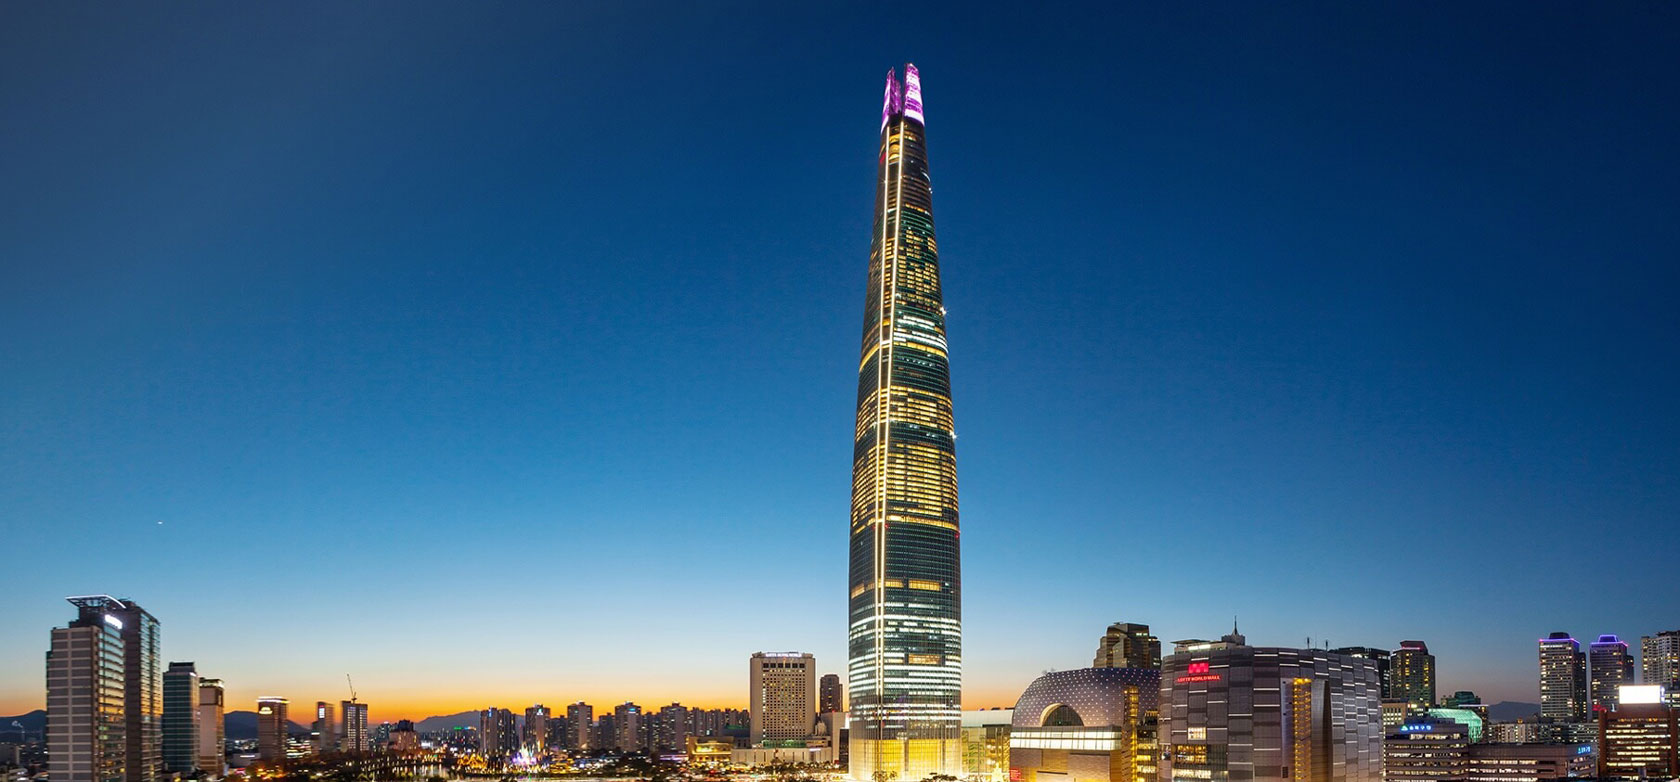 LOTTE WORLD TOWER 